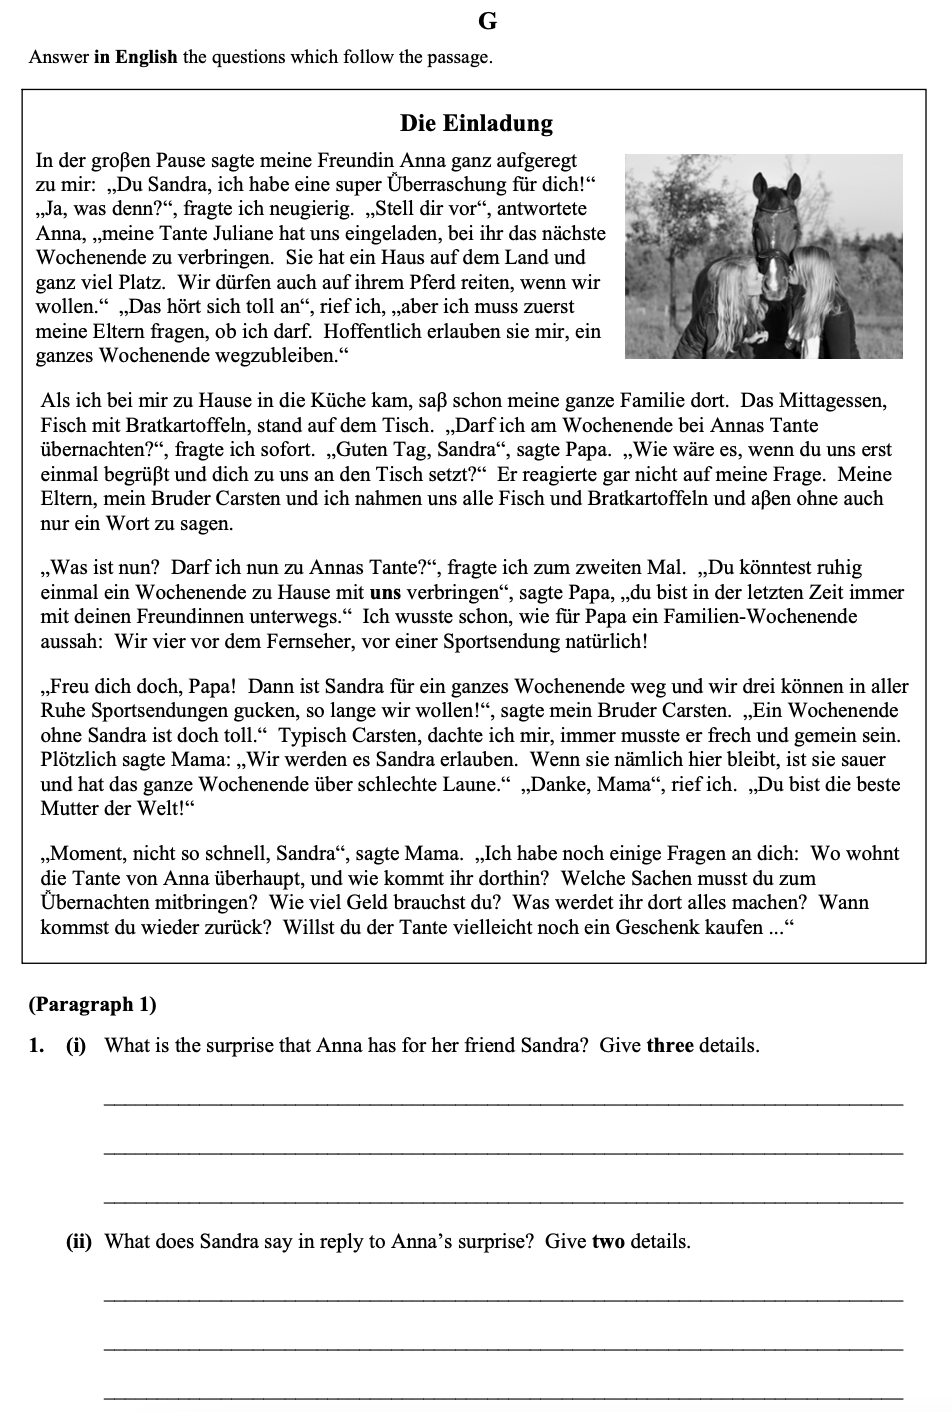 an image of the question 2012 Sec2 G which is about the topic read long text and the subject is Junior Certificate german